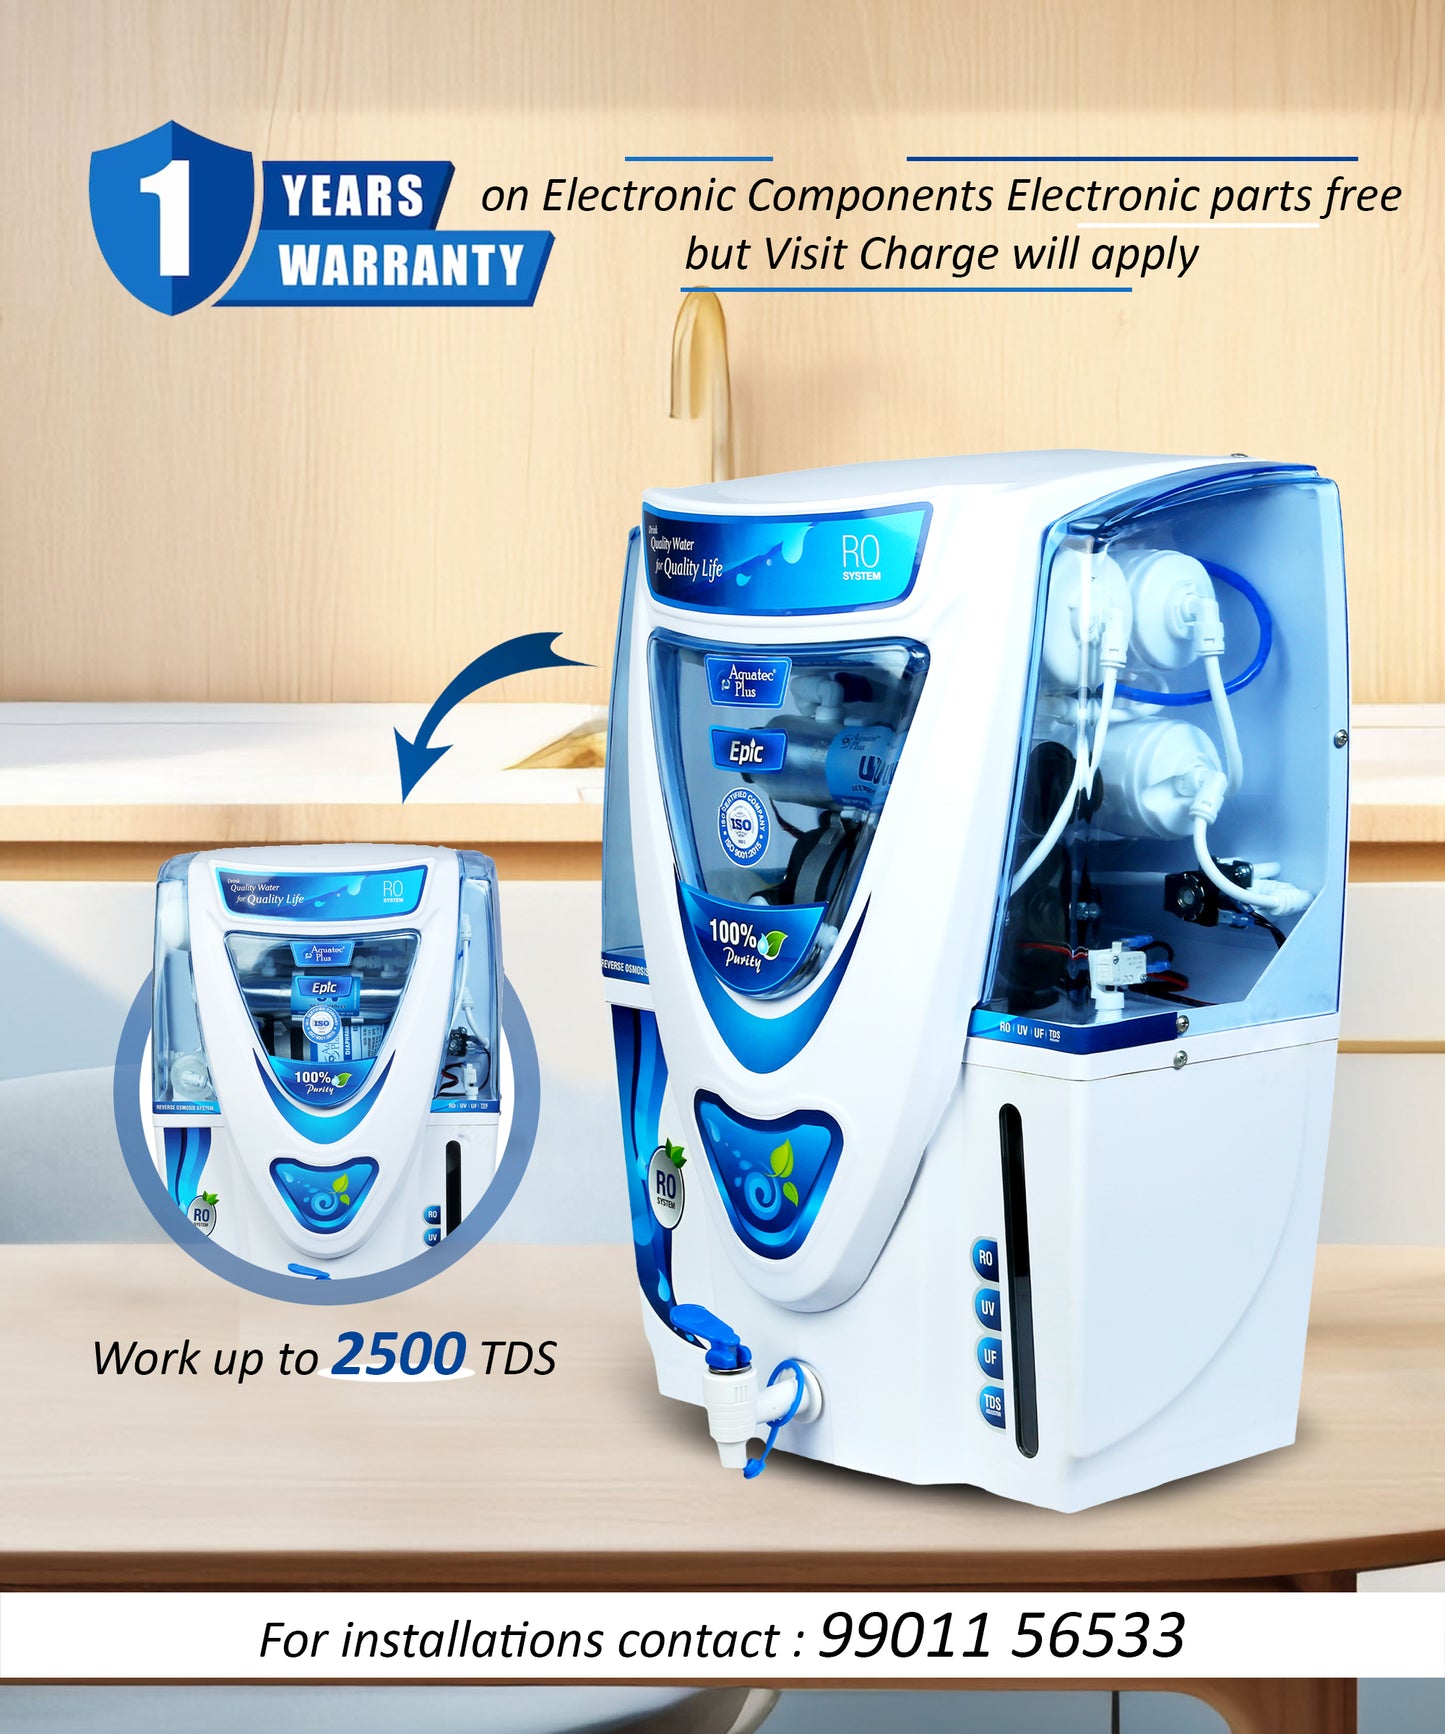 Epic 15 L RO+UV+UF+TDS Water Purifier for Home (White)